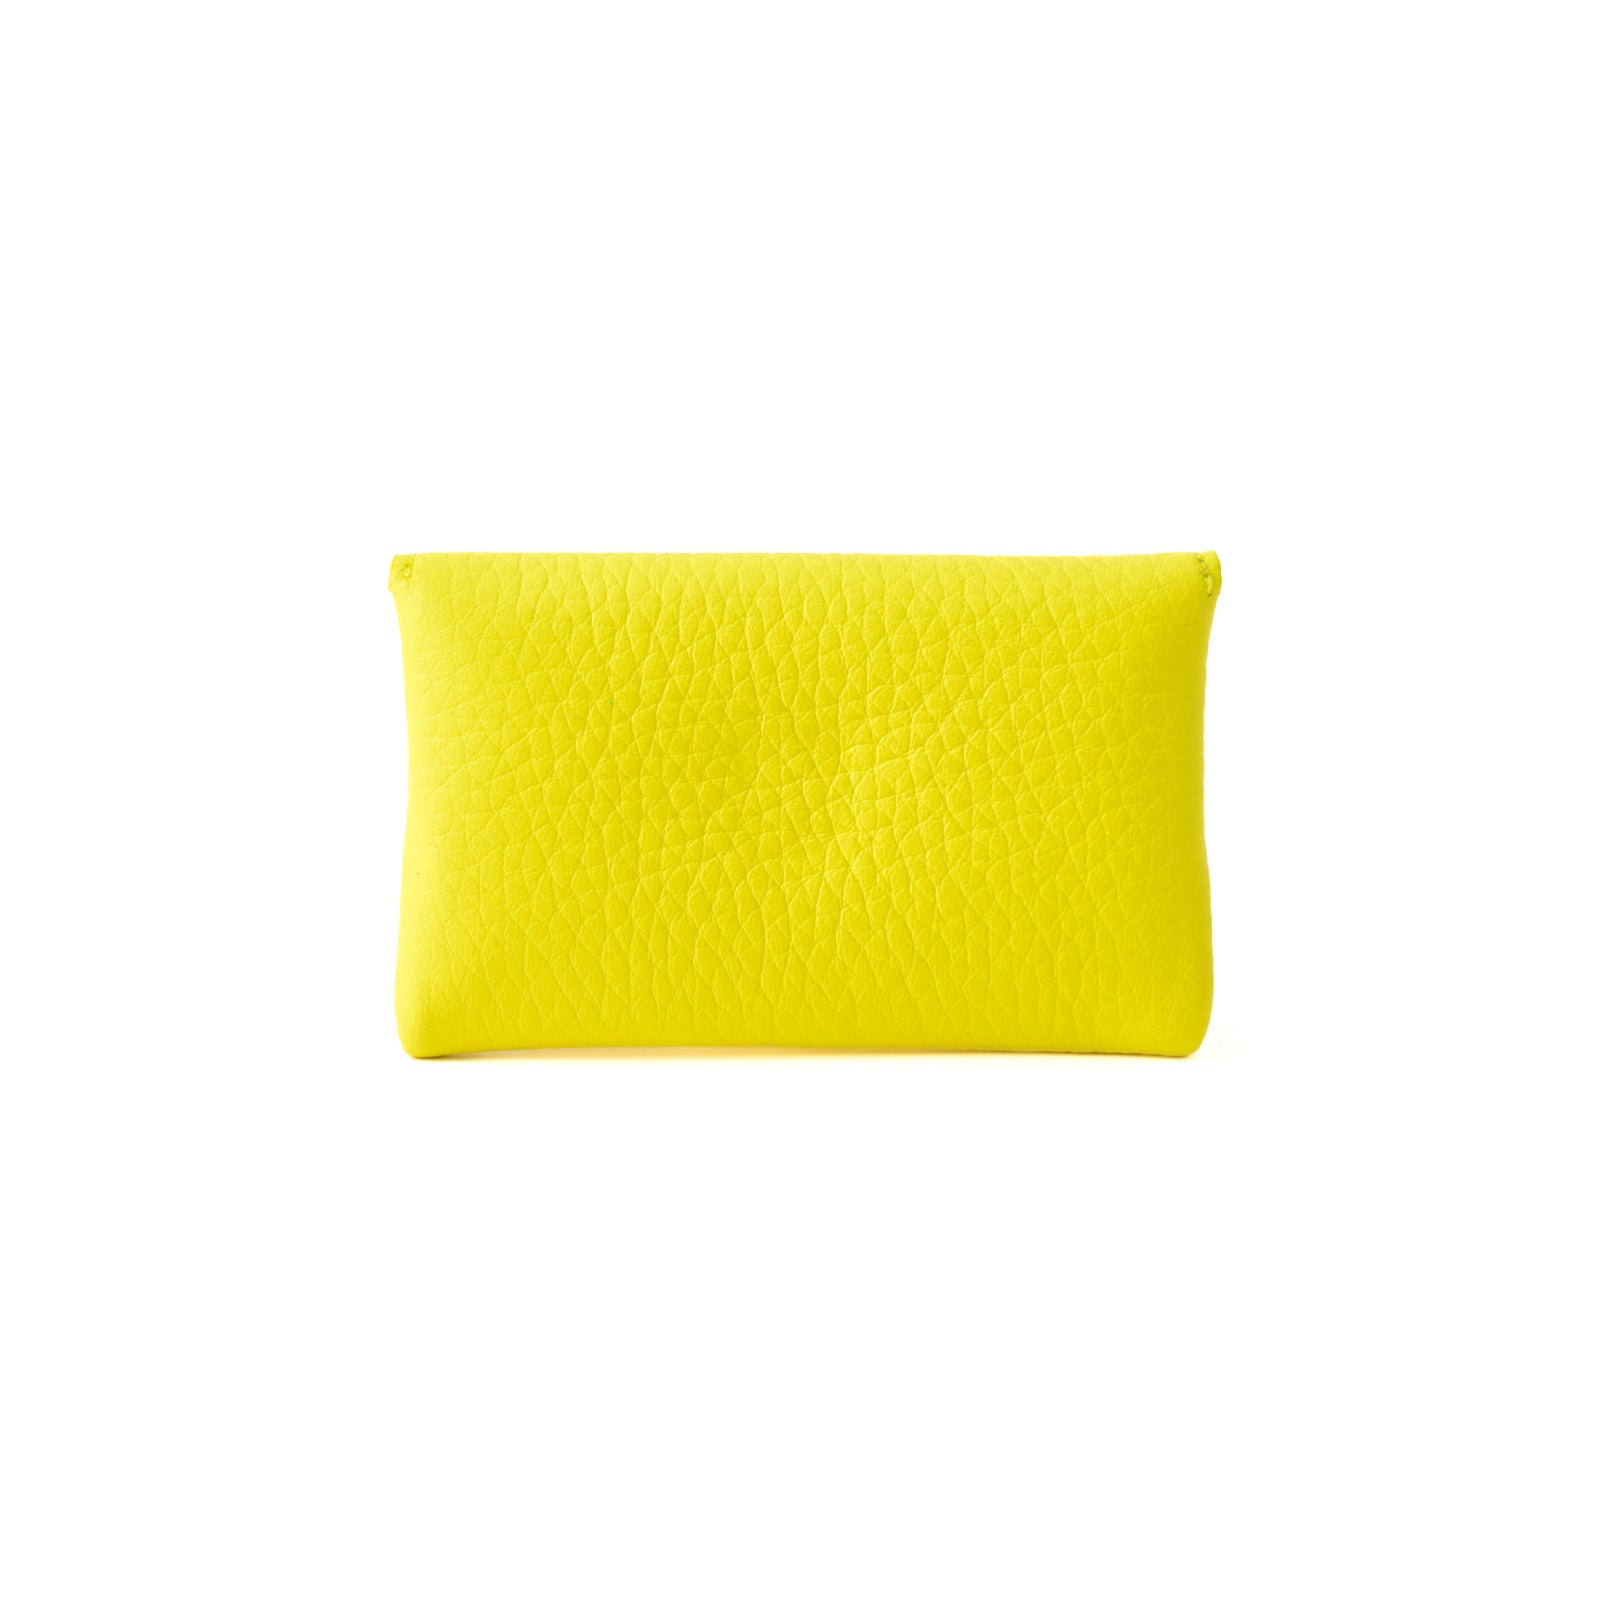 Leather flap mini wallet / Taurillon Clemence